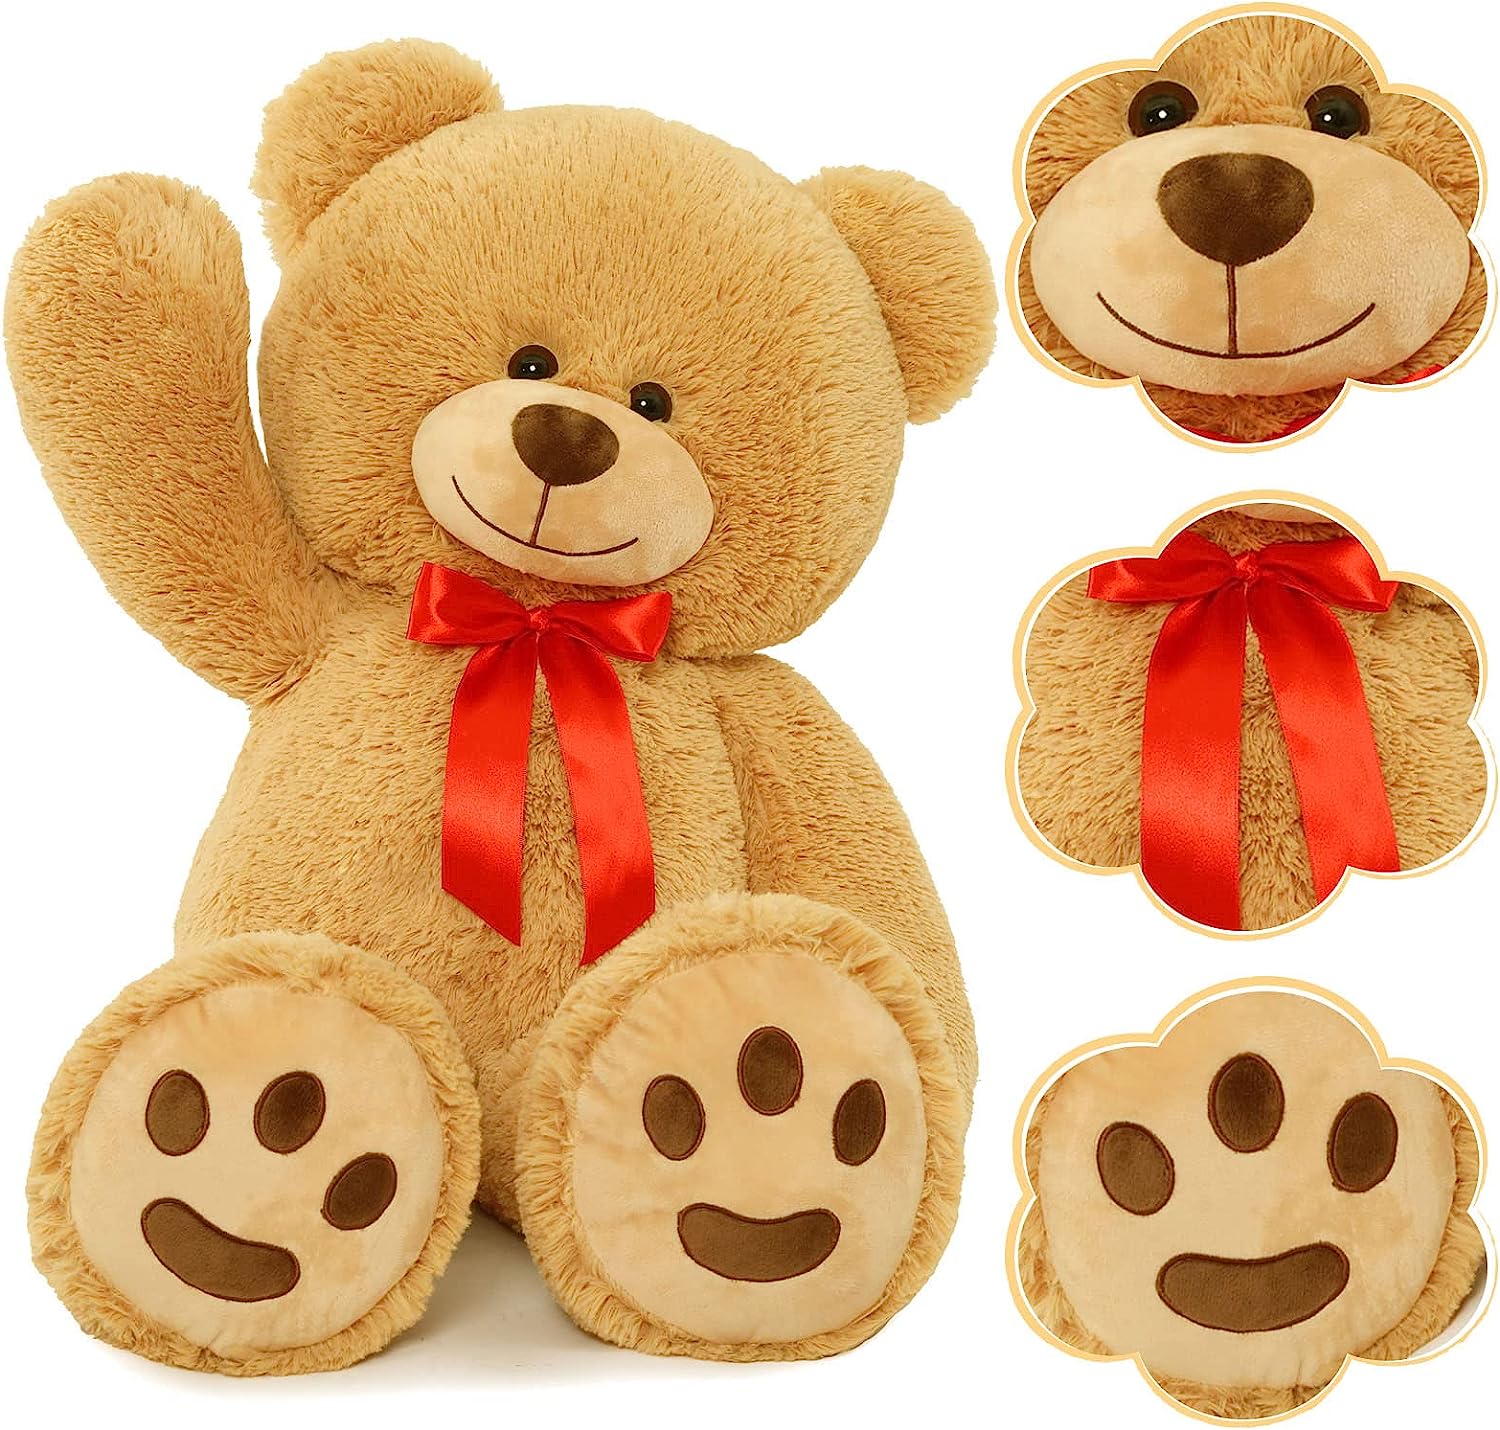 Giant Teddy Bear Plush Toy, Brown, 35.4 Inches